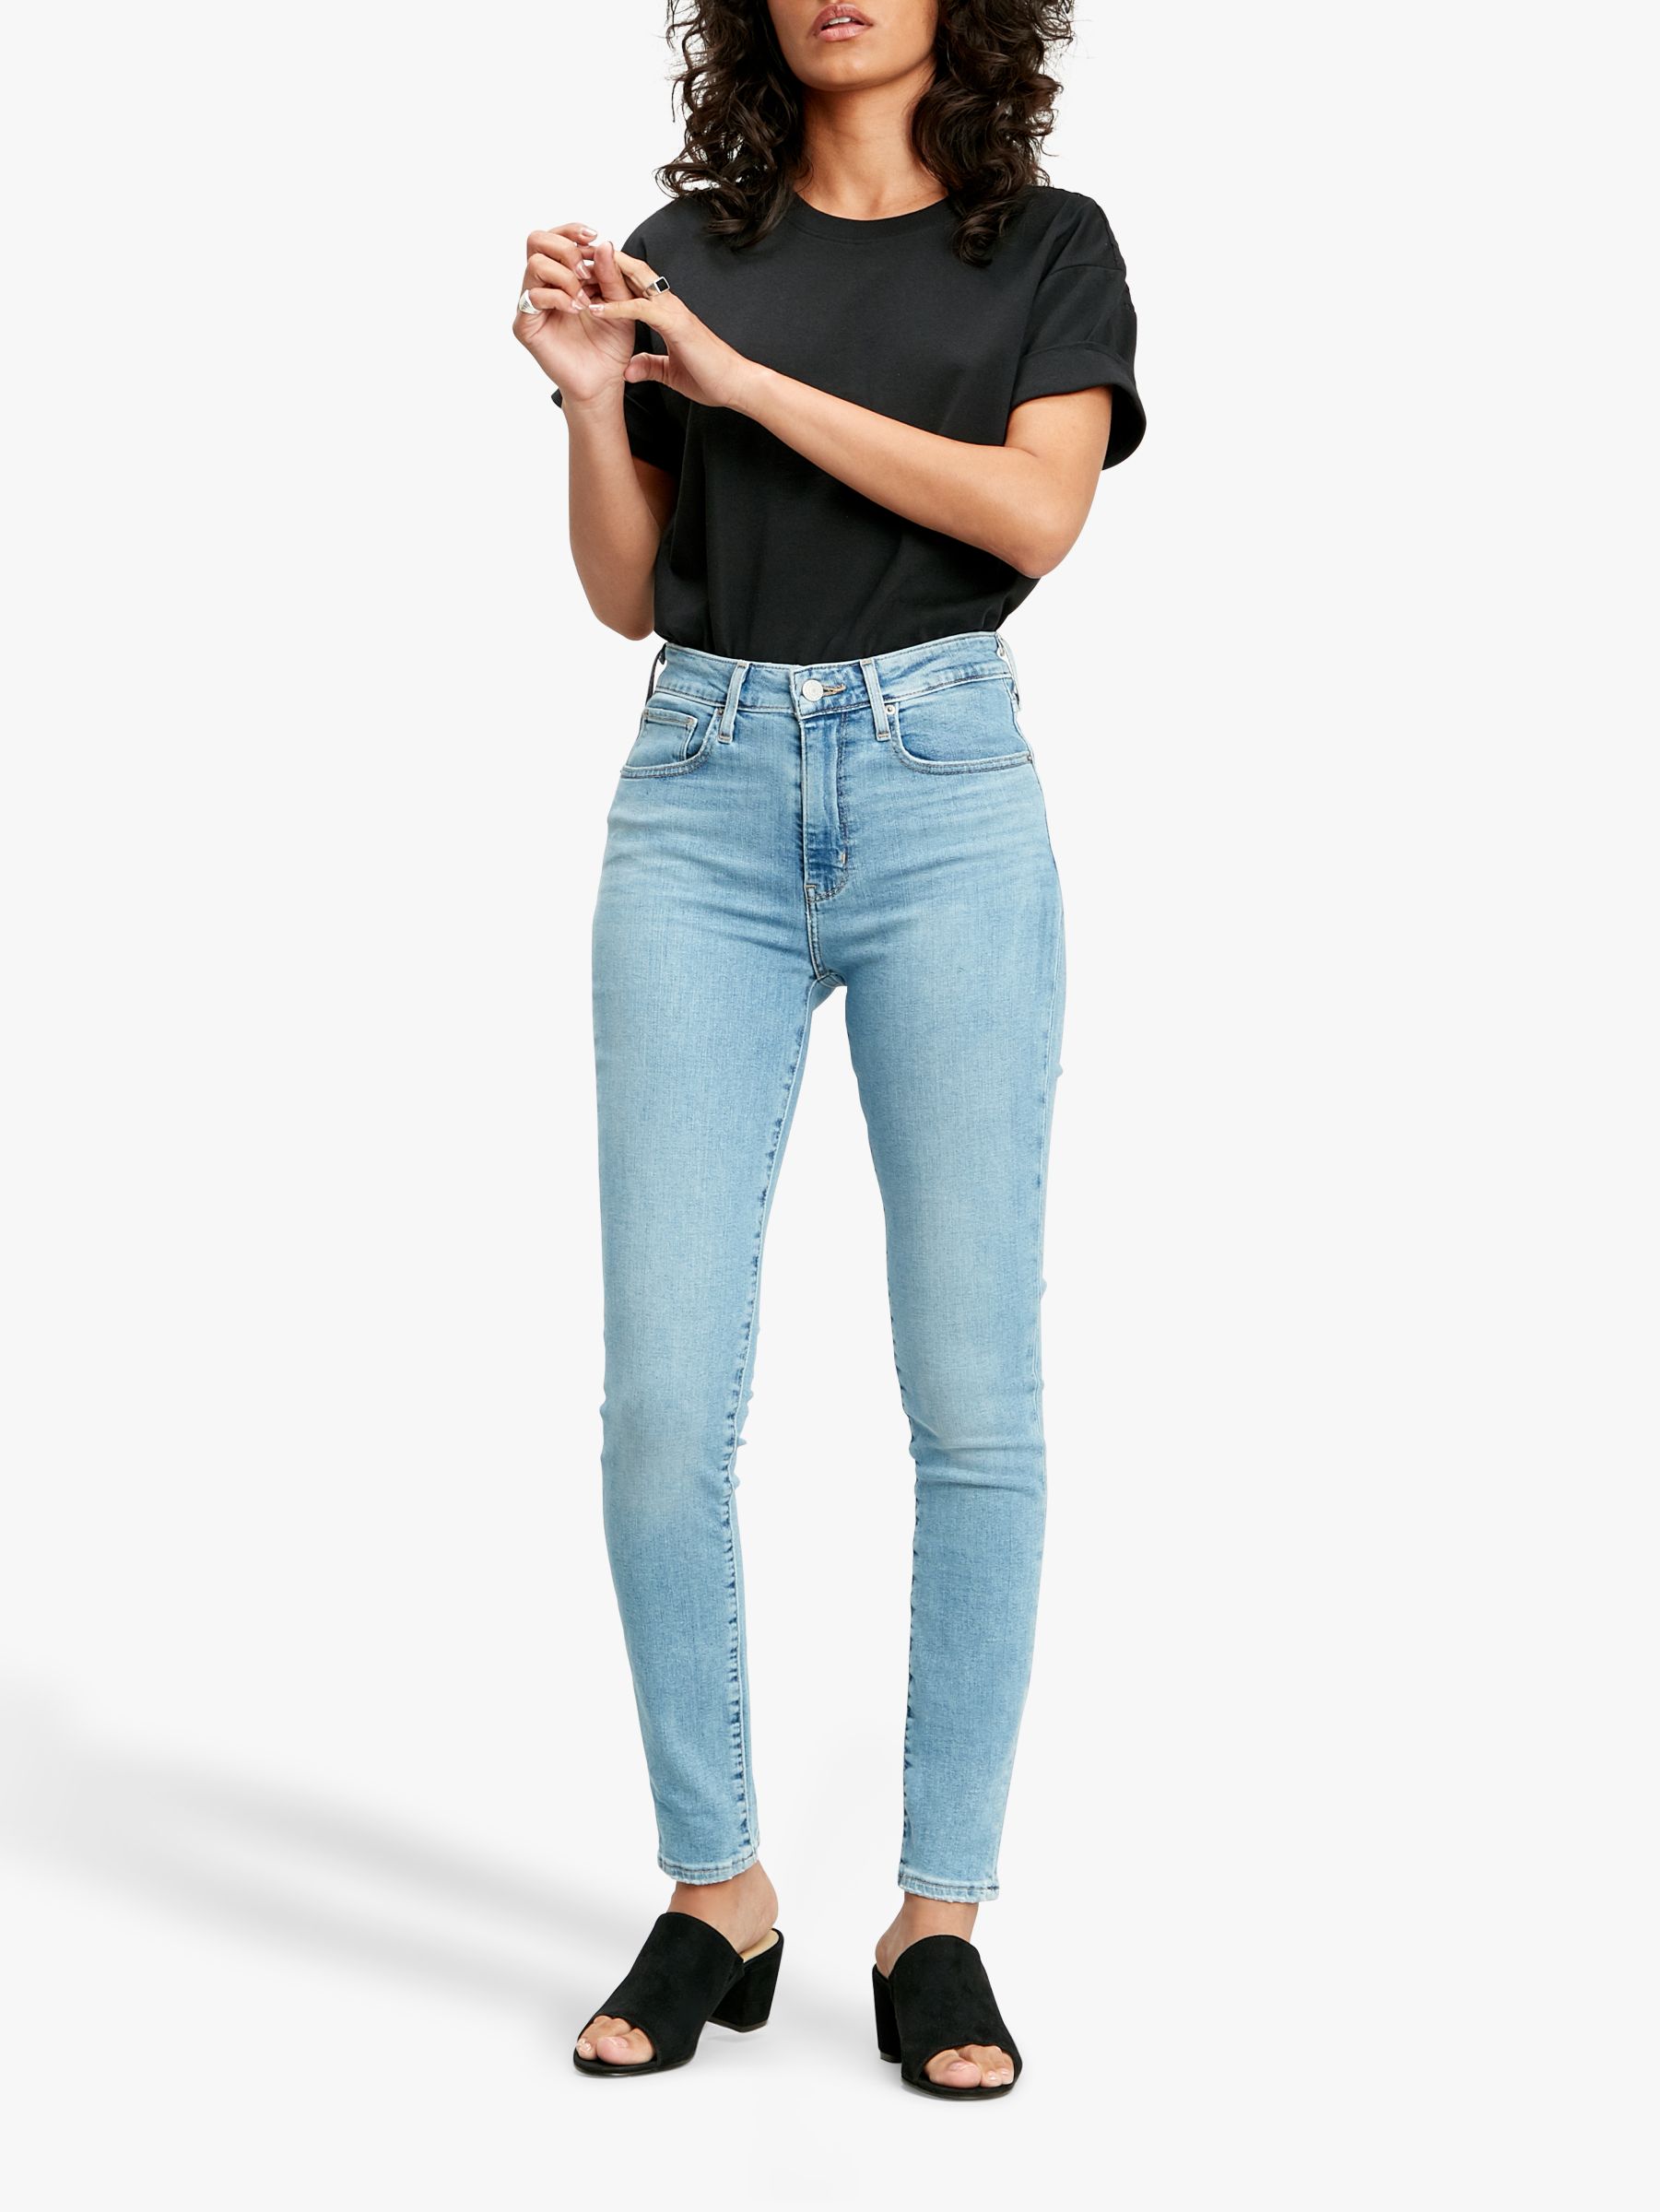 Levi's 721 High Rise Skinny Jeans, Have A Nice Day